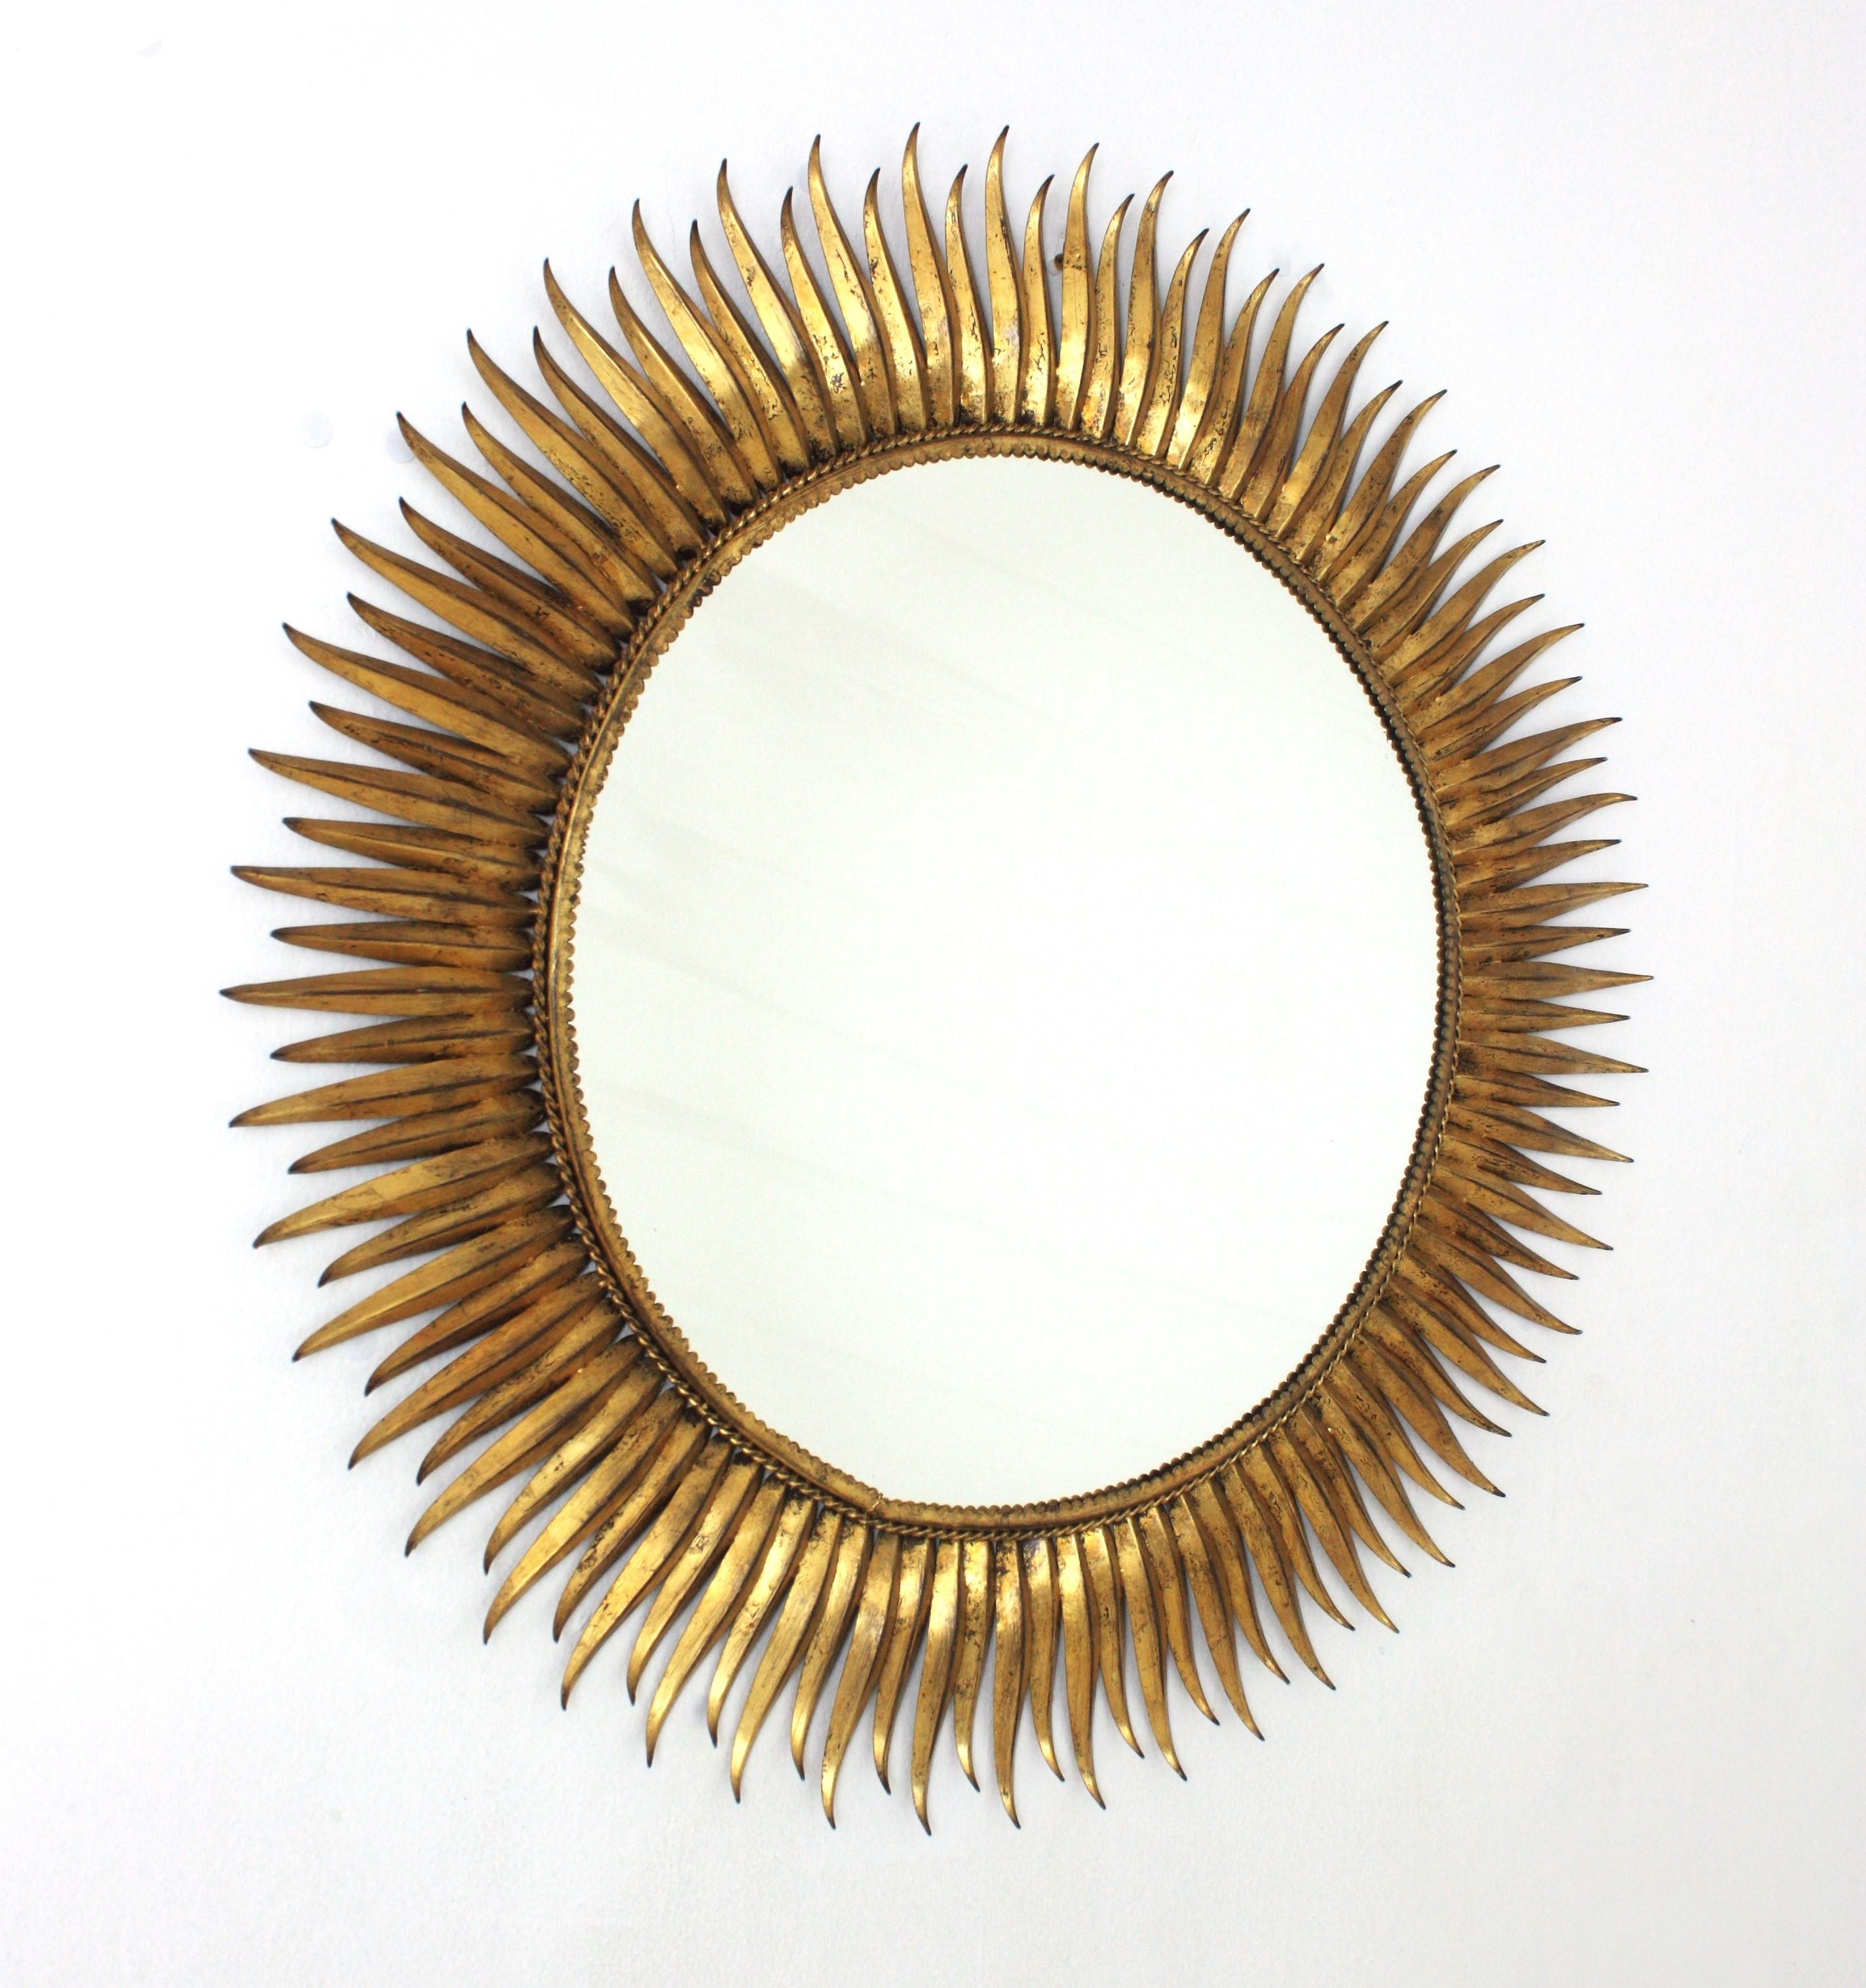 Outstanding Large scale gilt iron eyelash sunburst mirror. Spain, 1950s
The frame is made is entirely made by hand with alternating hand-hammered curved and straight rays in eyelash shape. Finished in gold leaf. Gorgeous gilding and patina.
This XL